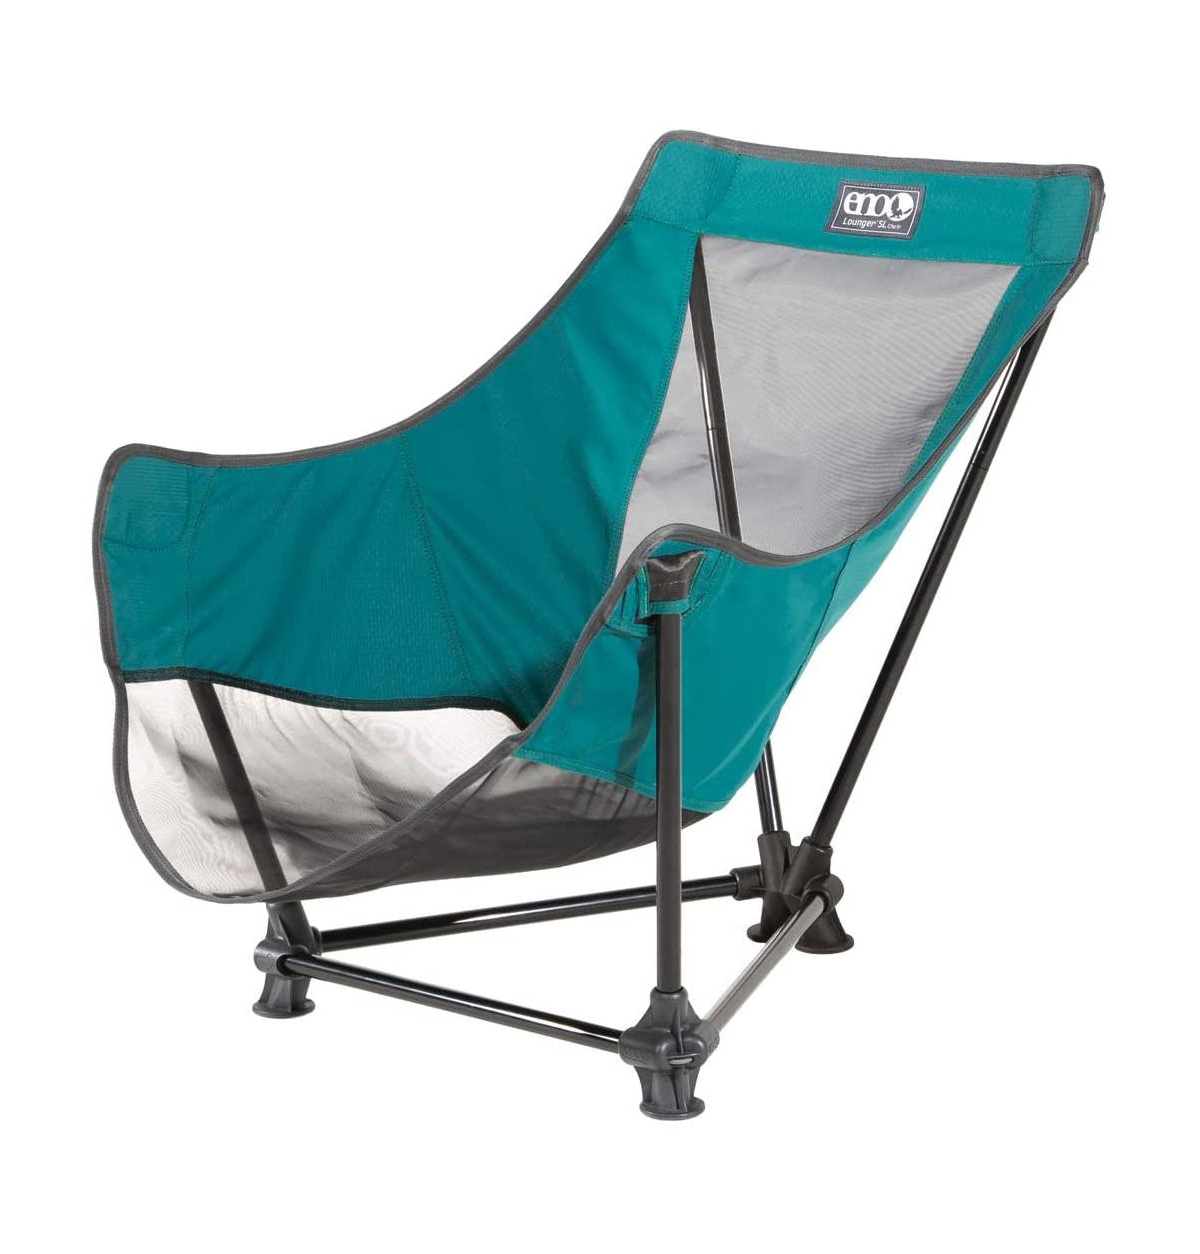 Lounger Sl Chair - Lightweight Portable Outdoor Hiking, Backpacking, Beach, Camping, and Festival Chair - Seafoam - Seafoam